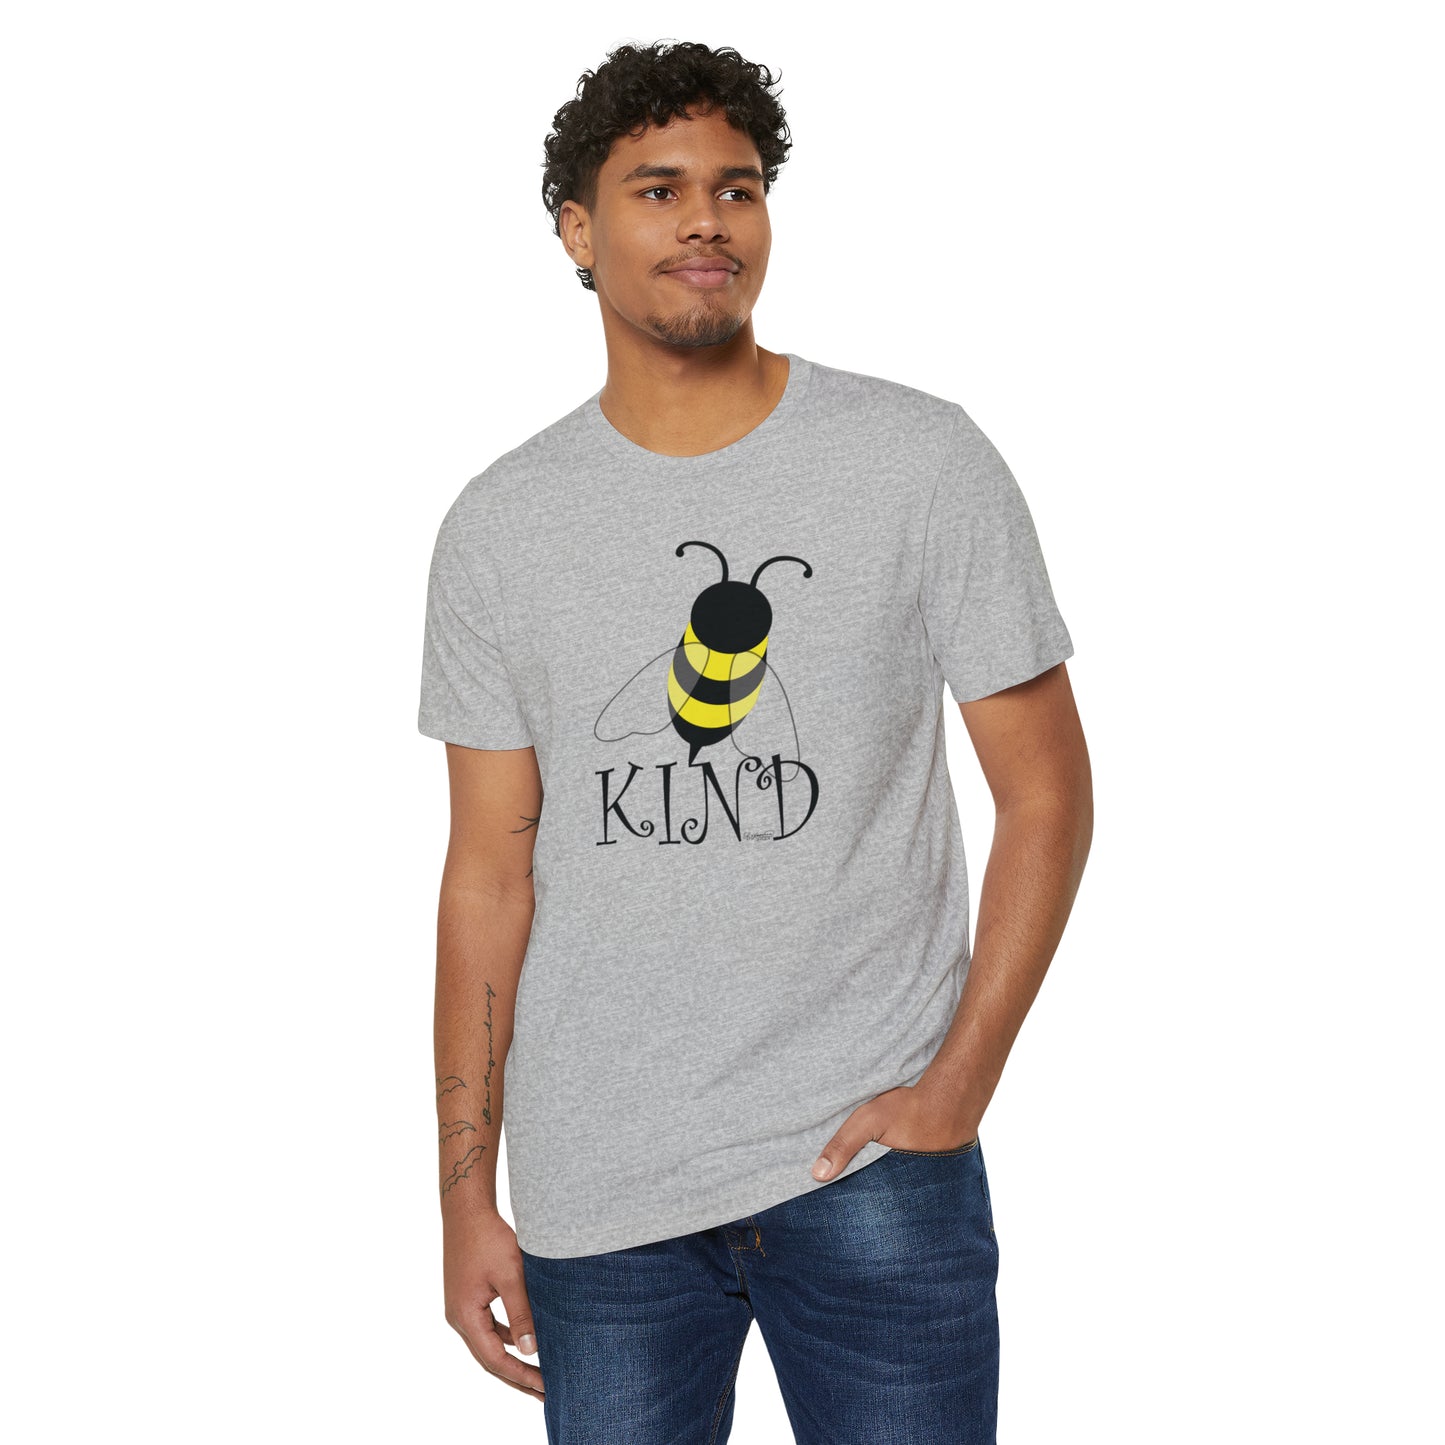 Bee Kind: The Eco-Friendly Organic Recycled Unisex T-Shirt That Shows Your Love for Nature and Compassion